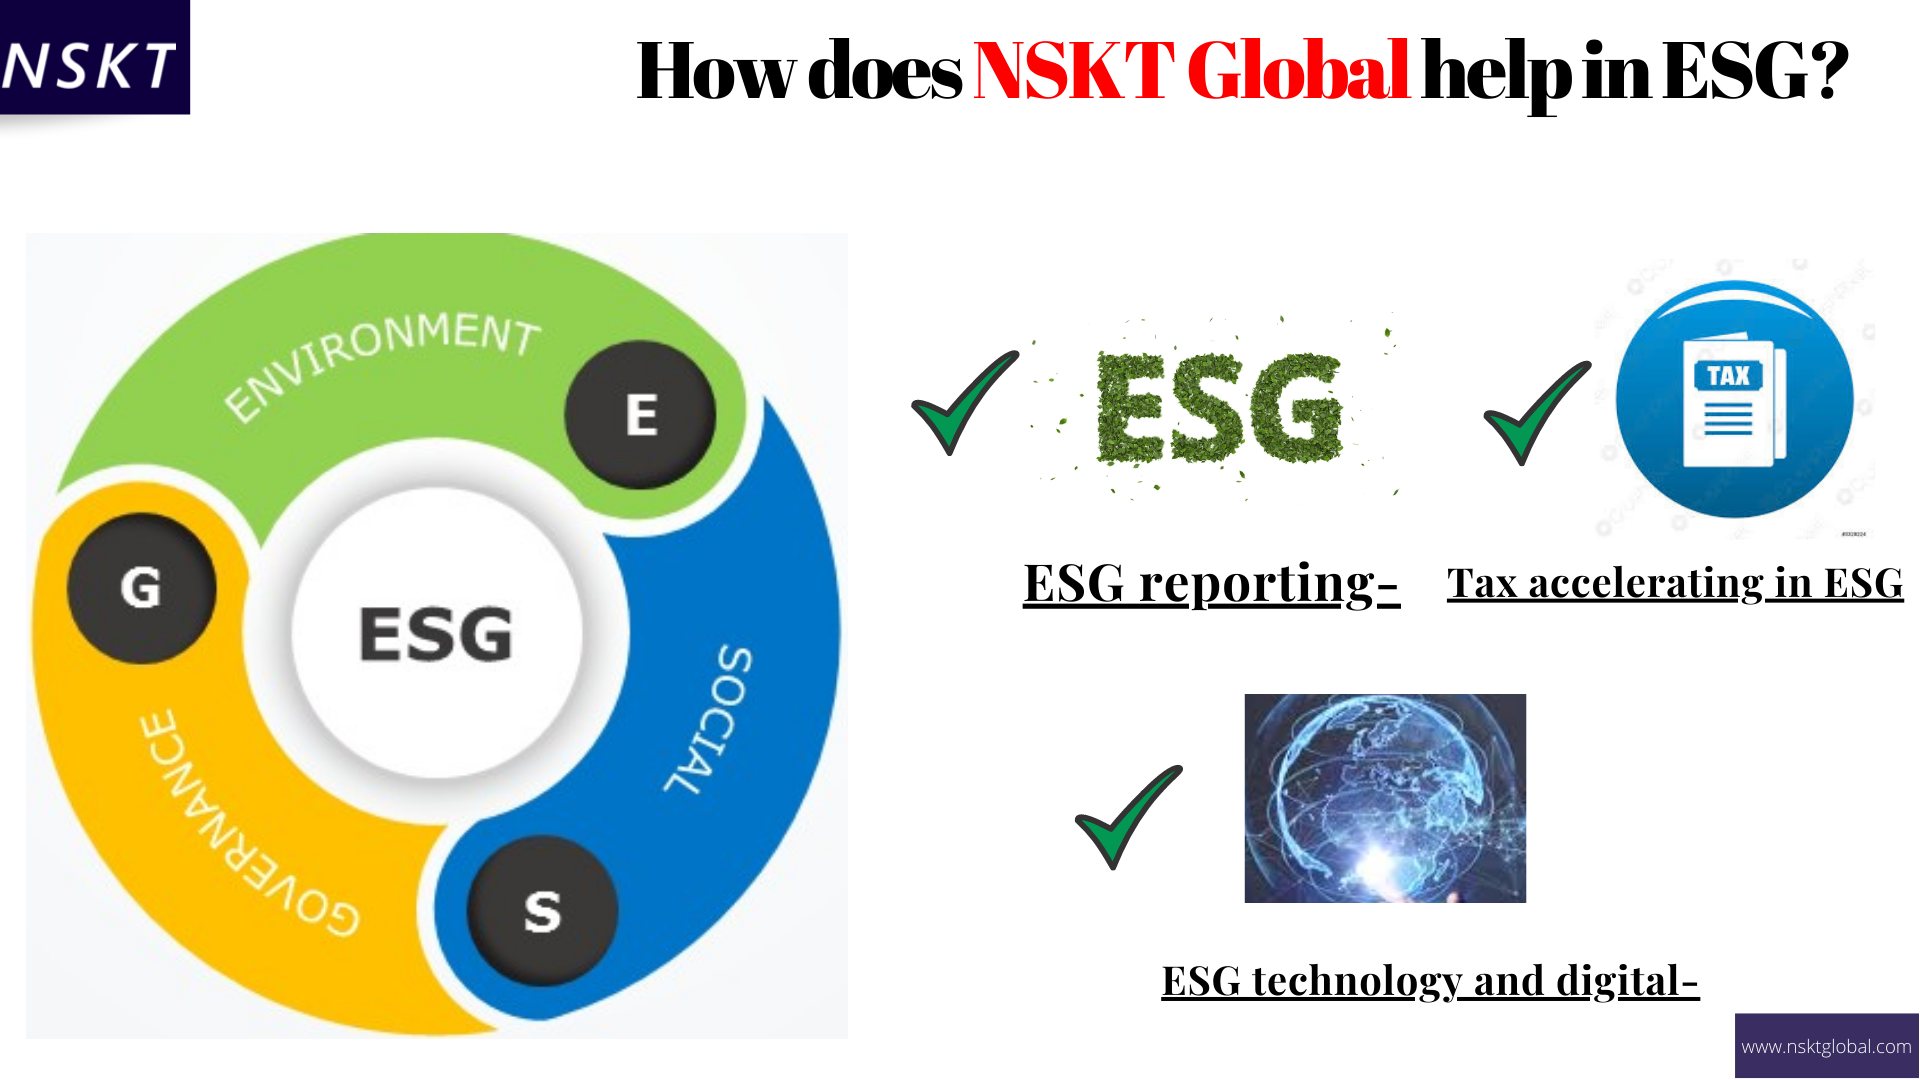 How to enhance the ESG of an organization for a better future?